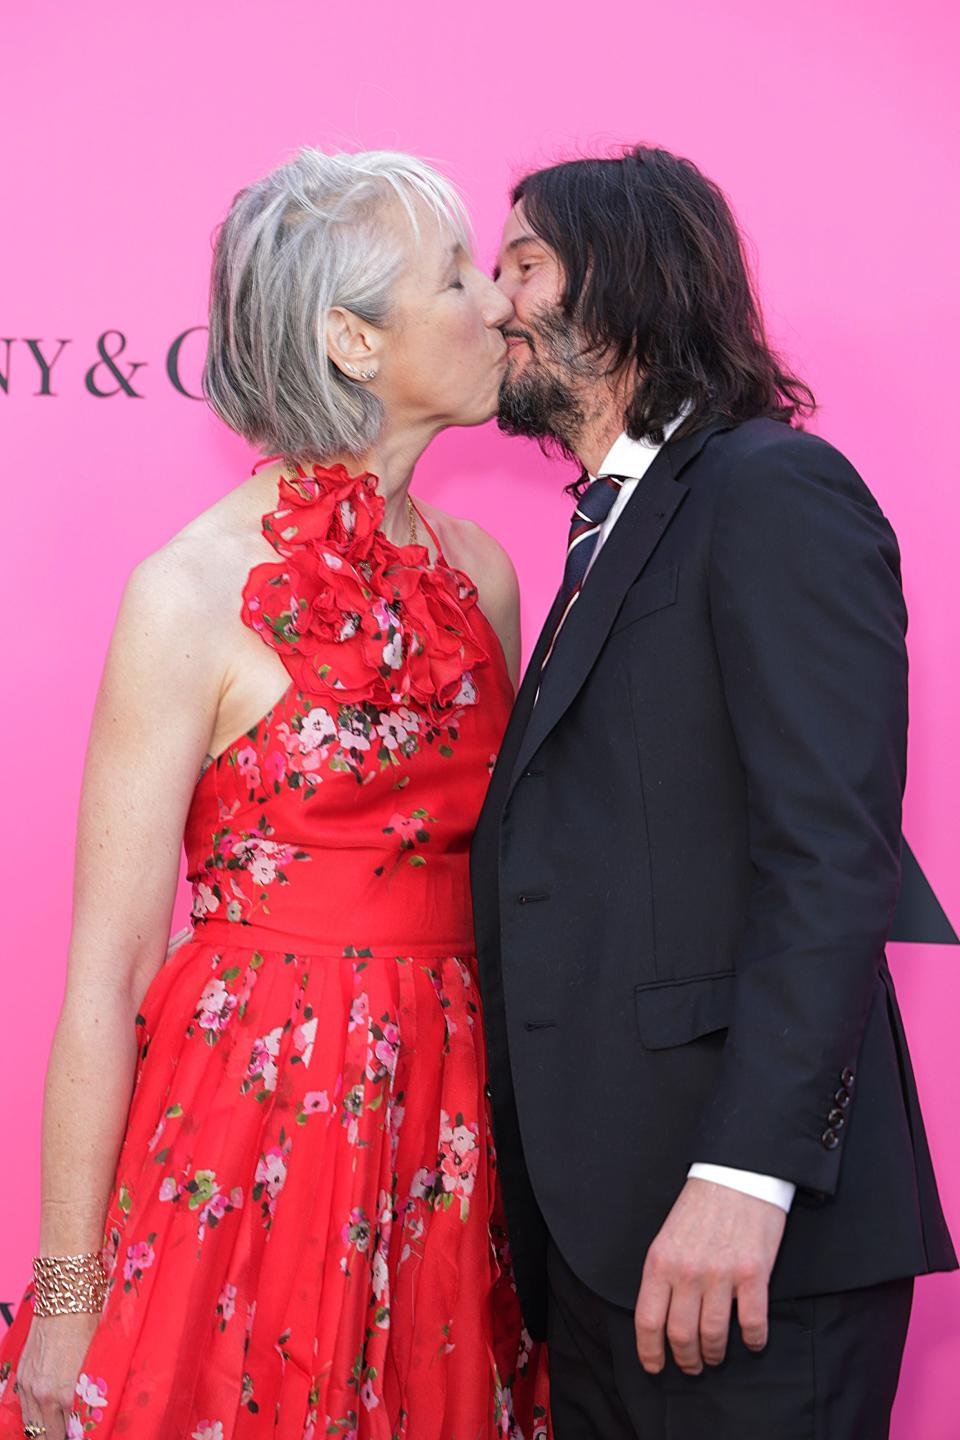 Keanu Reeves and his girlfriend, Alexandra Grant, share a kiss in a